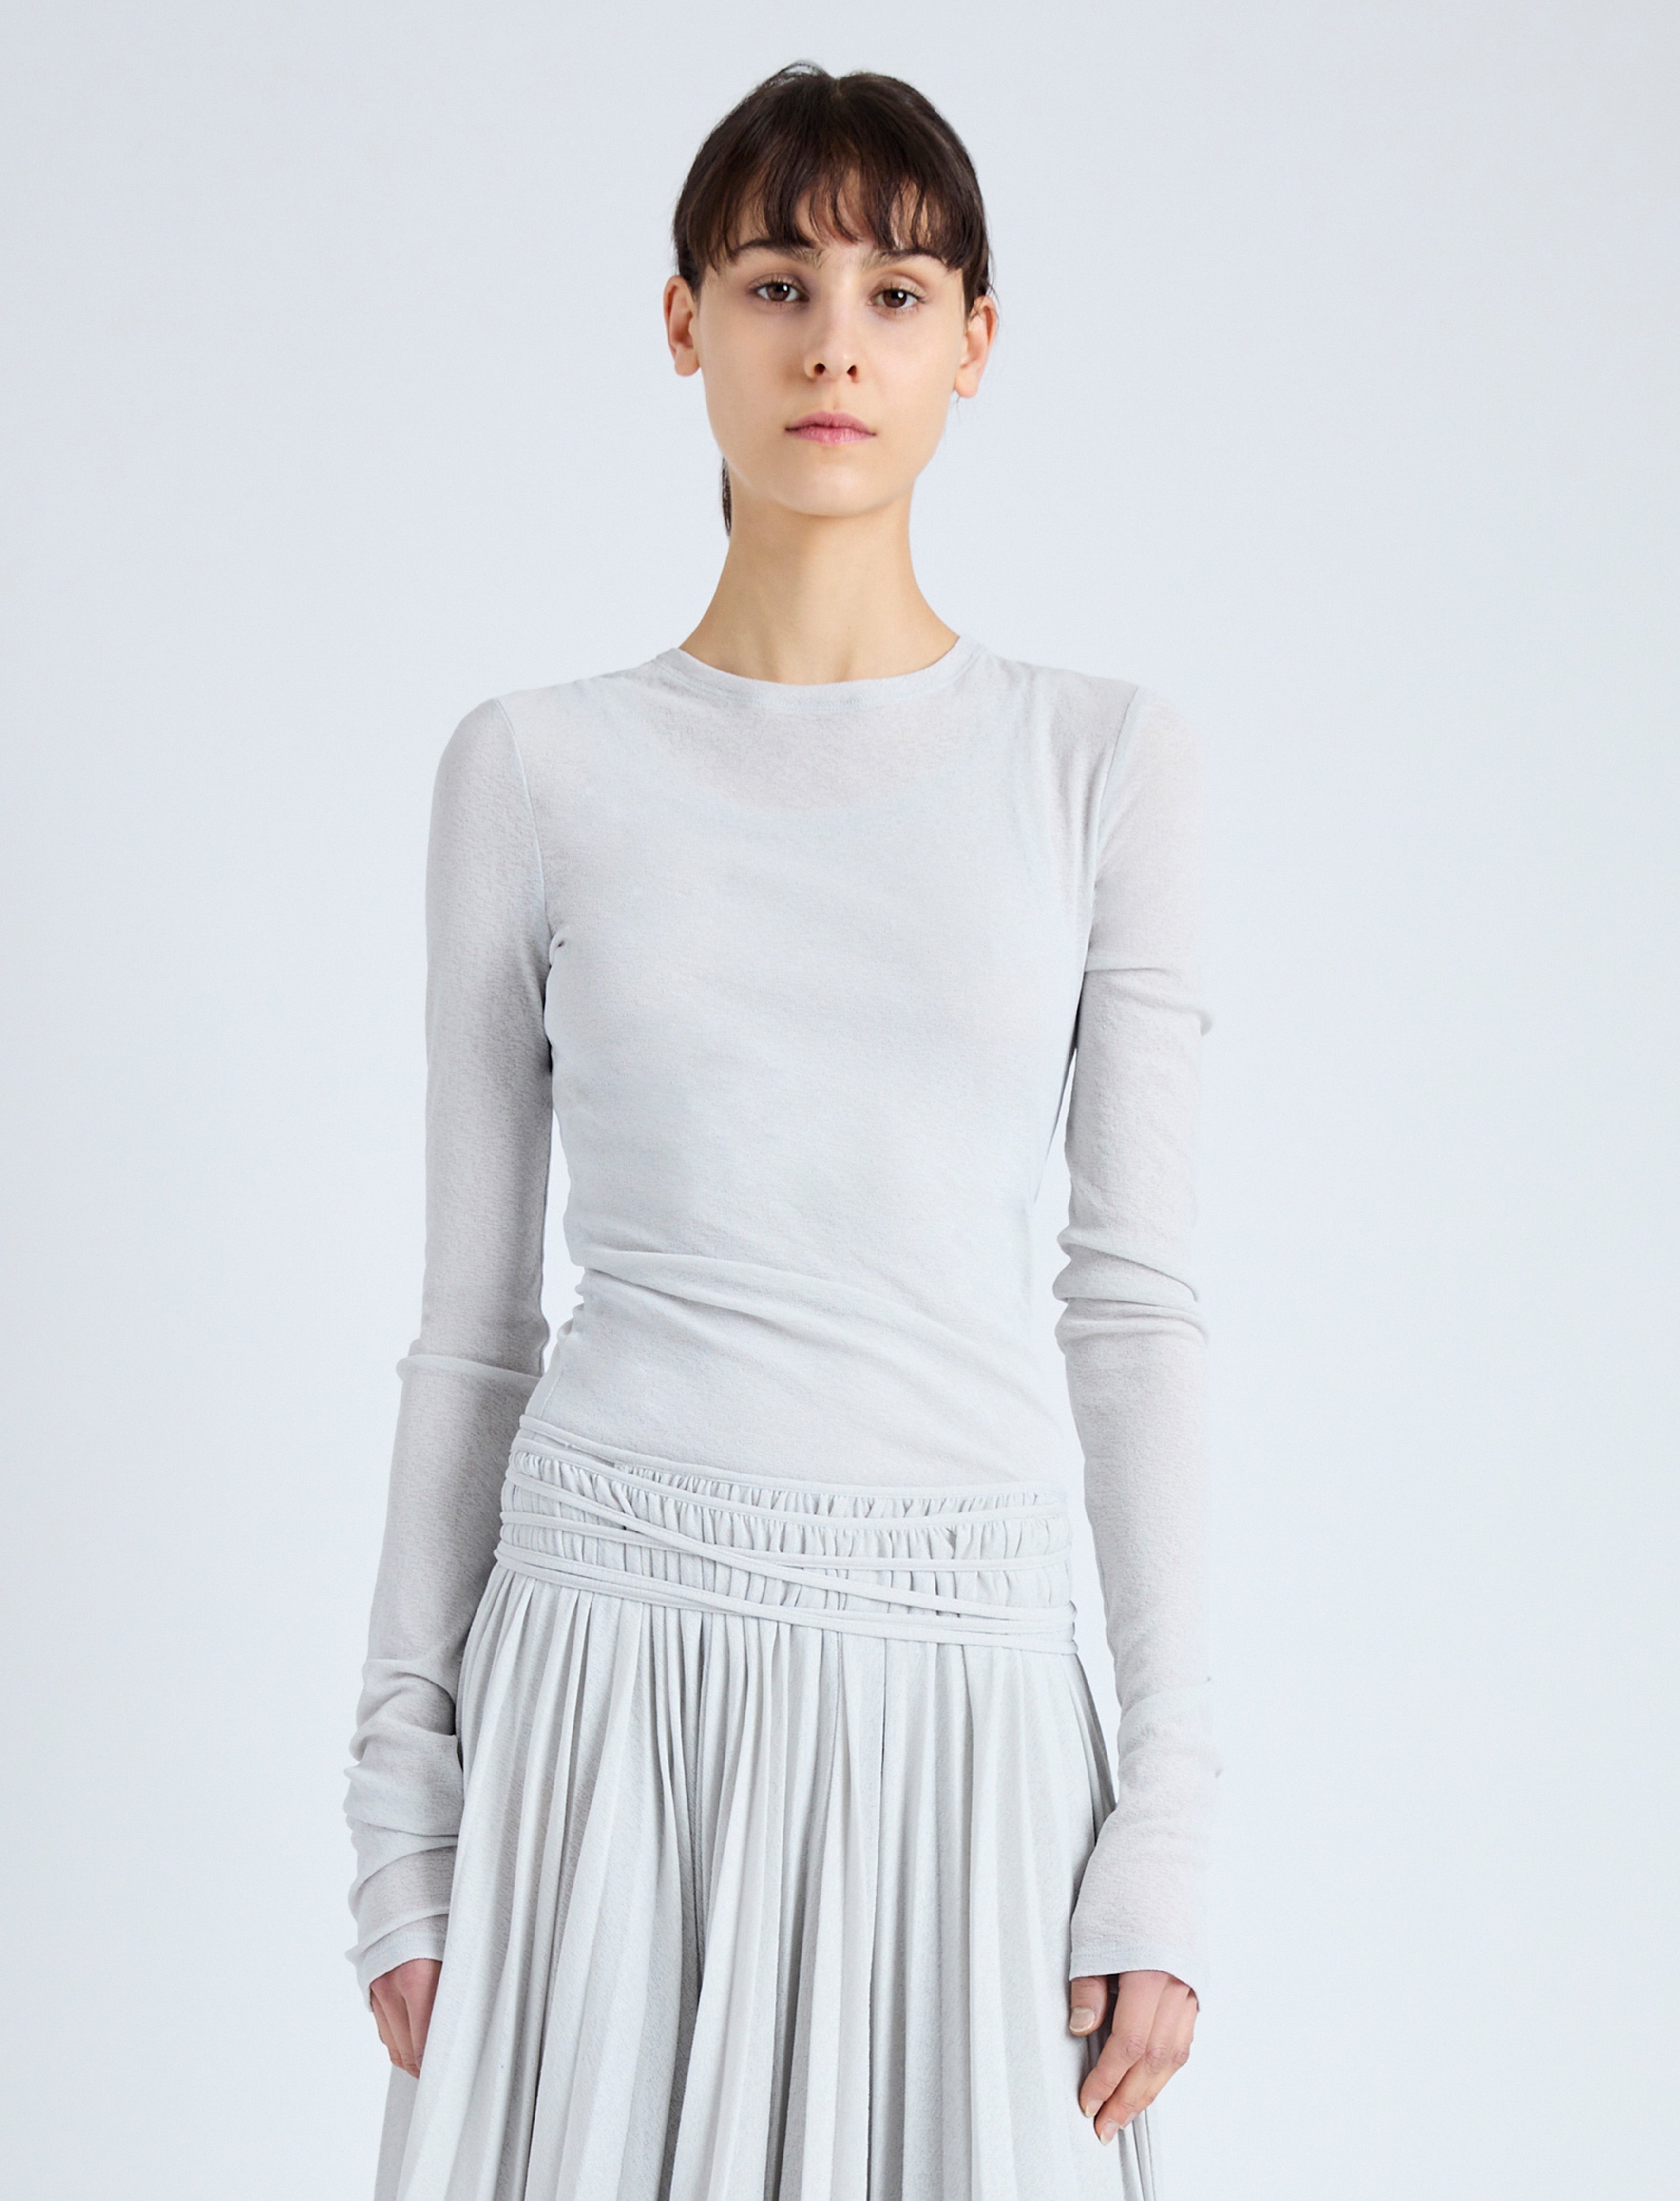 Roger Layered Top in Gauzy Jersey - 2